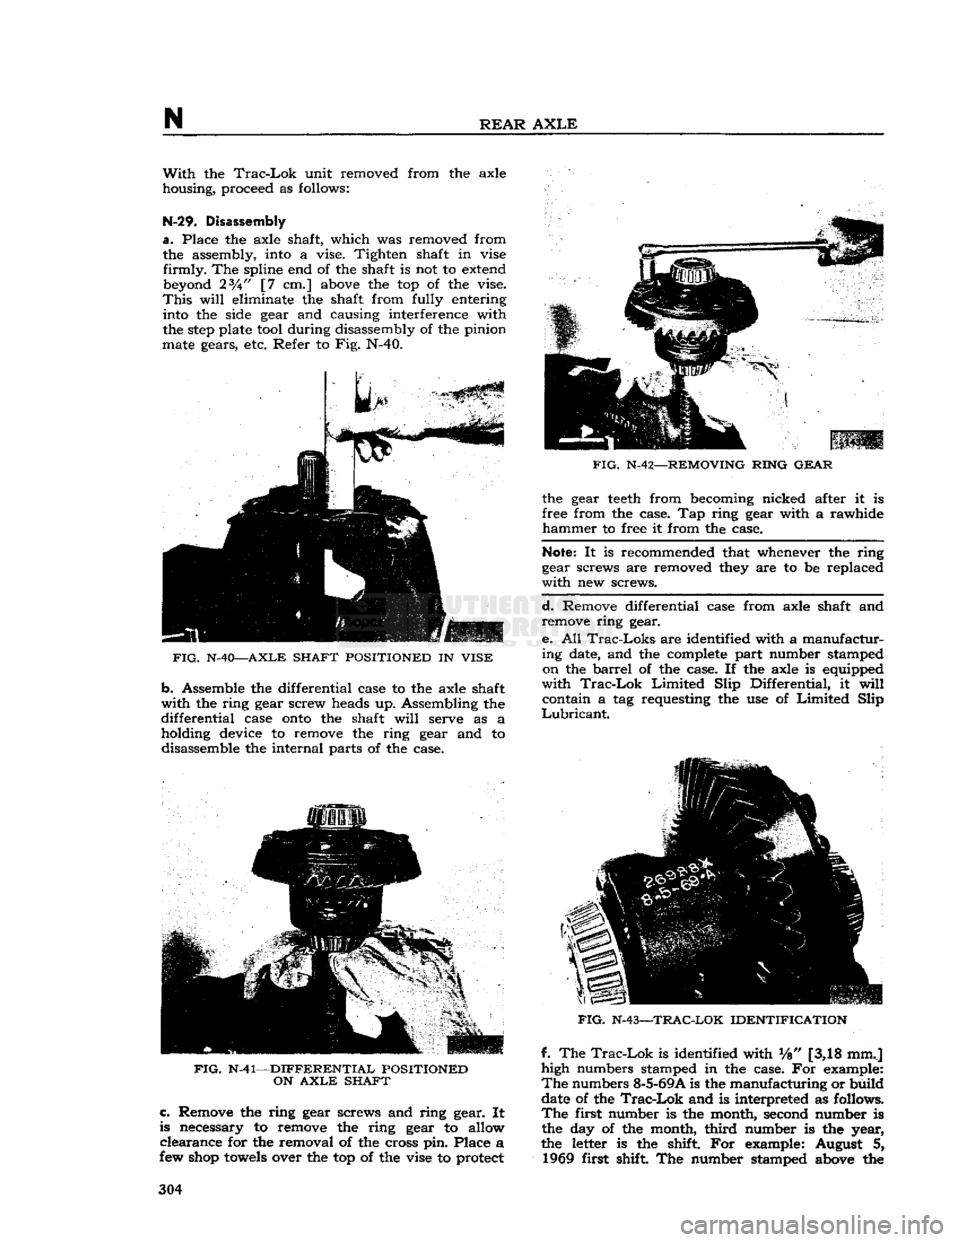 JEEP CJ 1953  Service Manual 
N 

REAR
 AXLE 
With
 the
 Trac-Lok
 unit removed from the axle 
housing, proceed as follows: 

N-29.
 Disassembly 

a.
 Place the axle shaft, which was removed from  the assembly, into a vise. Tight